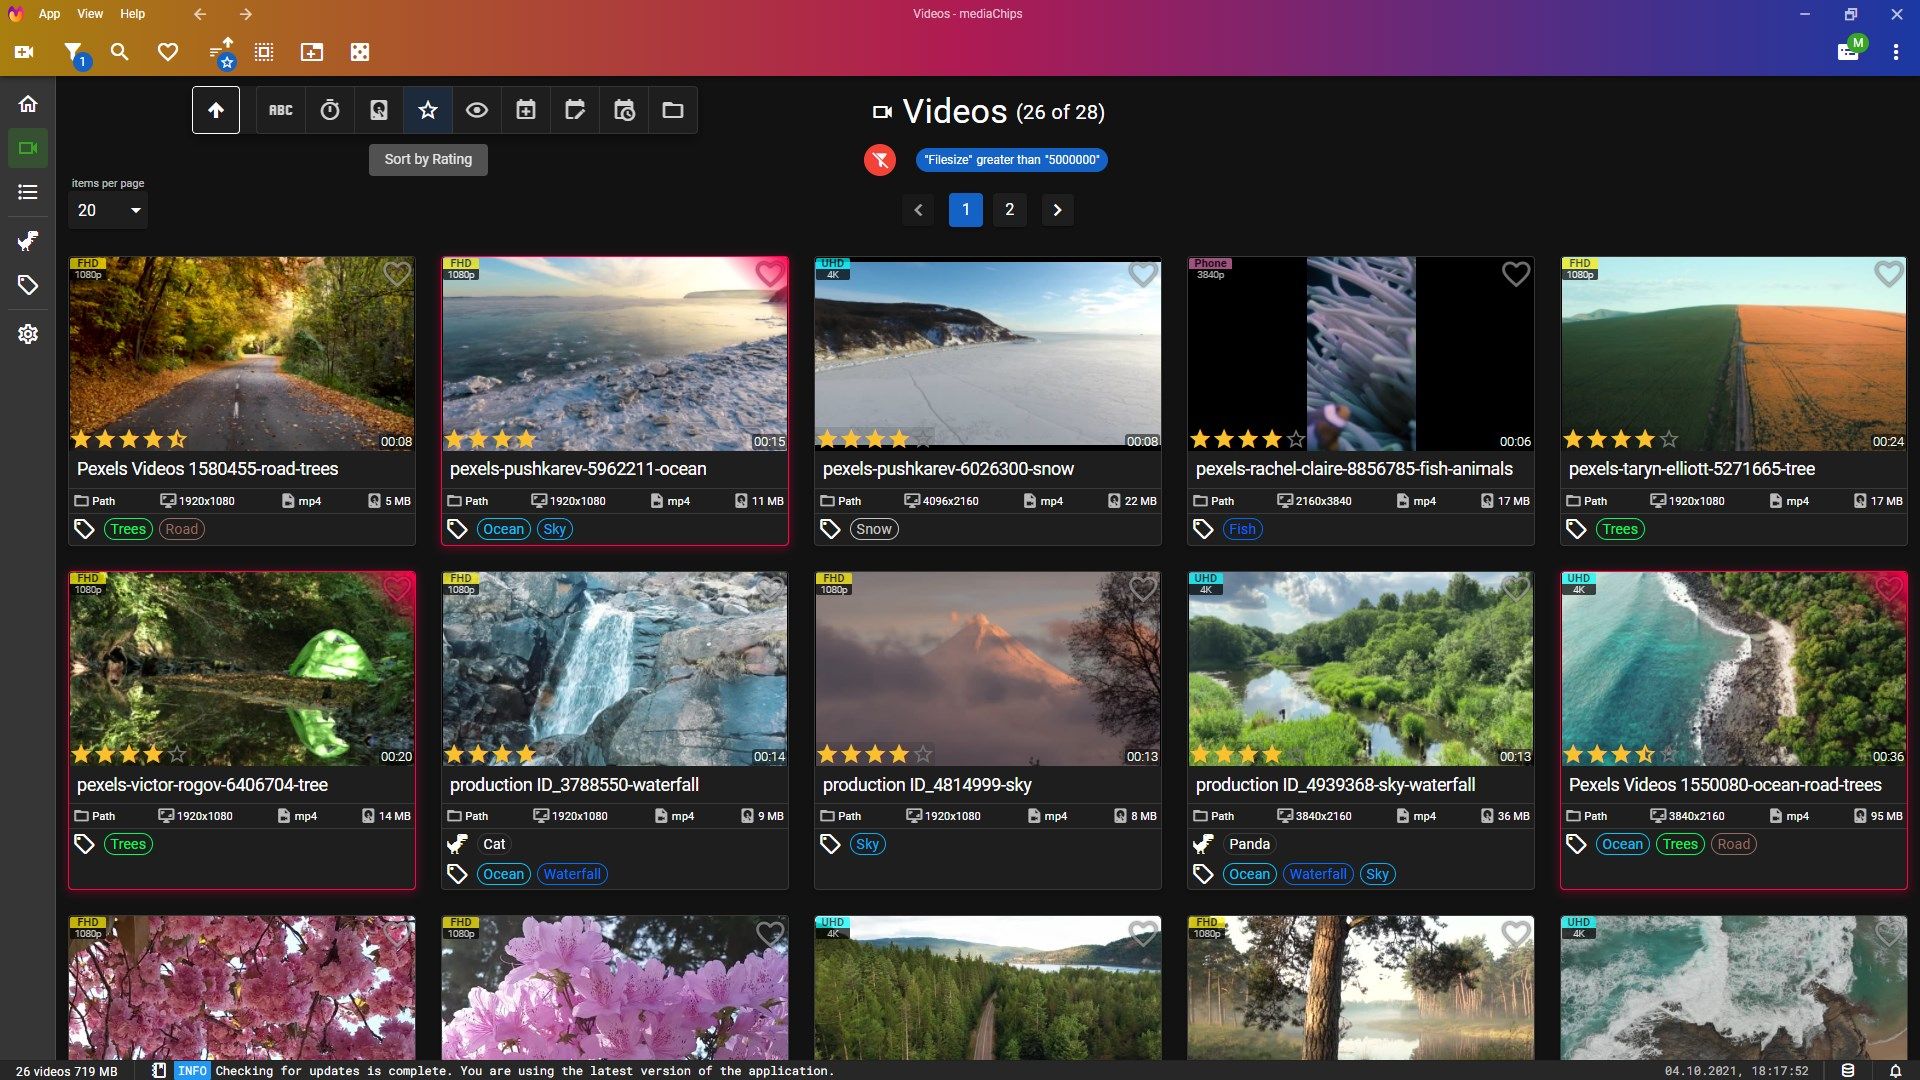 Dark theme. You can also sort videos by a large number of parameters.